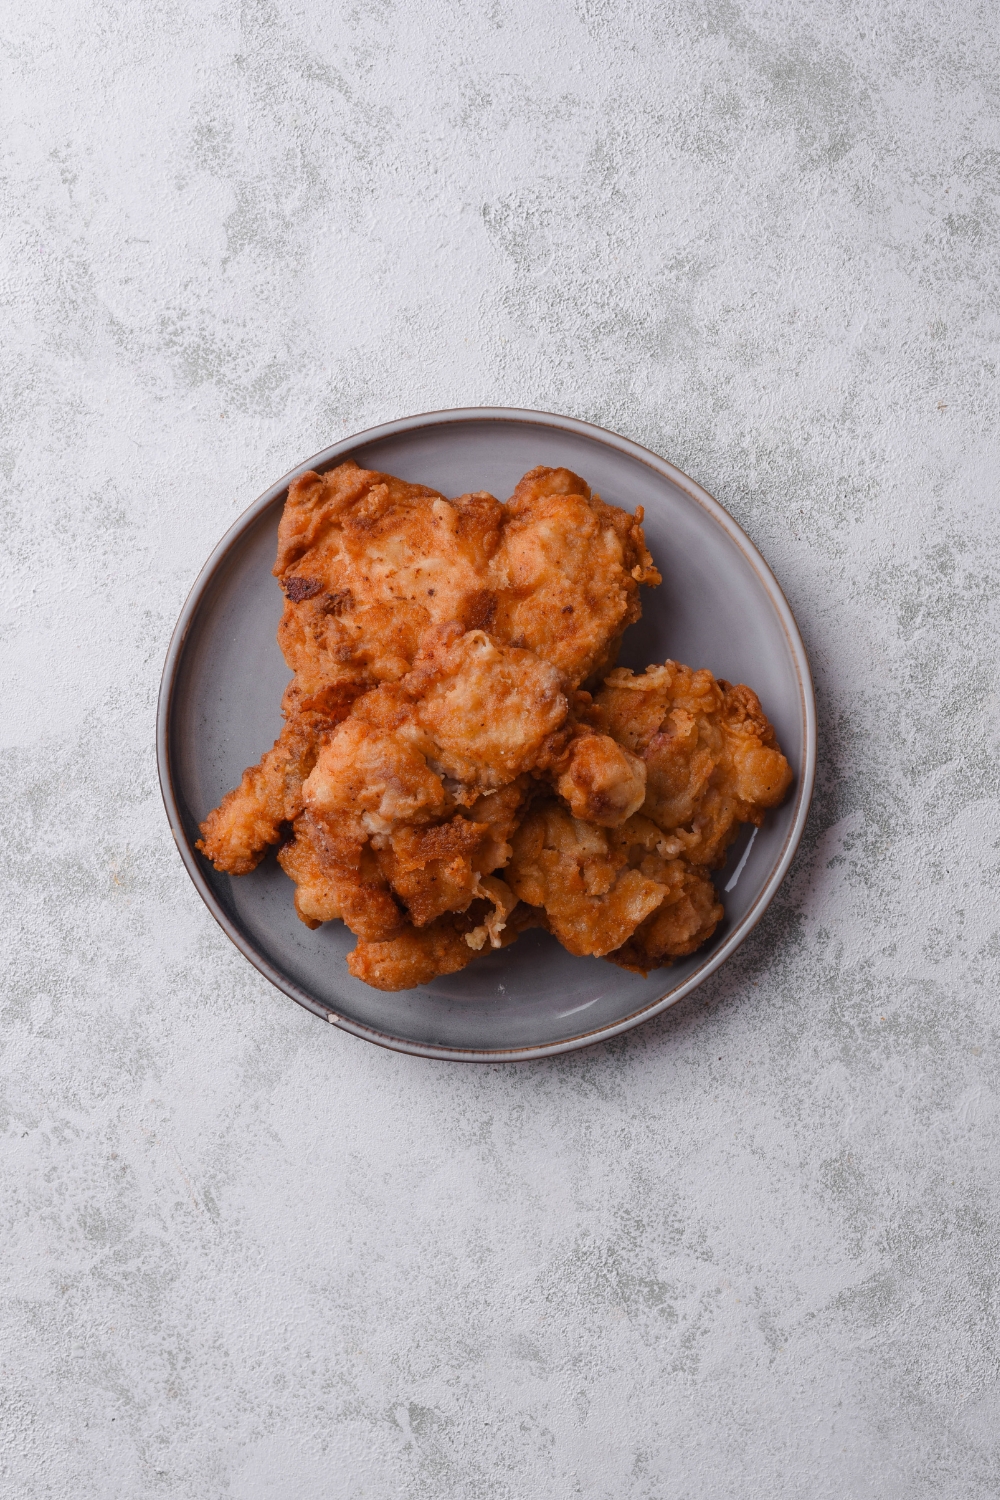 Overhead view of a plate of fried chicken piled high on top of each other.